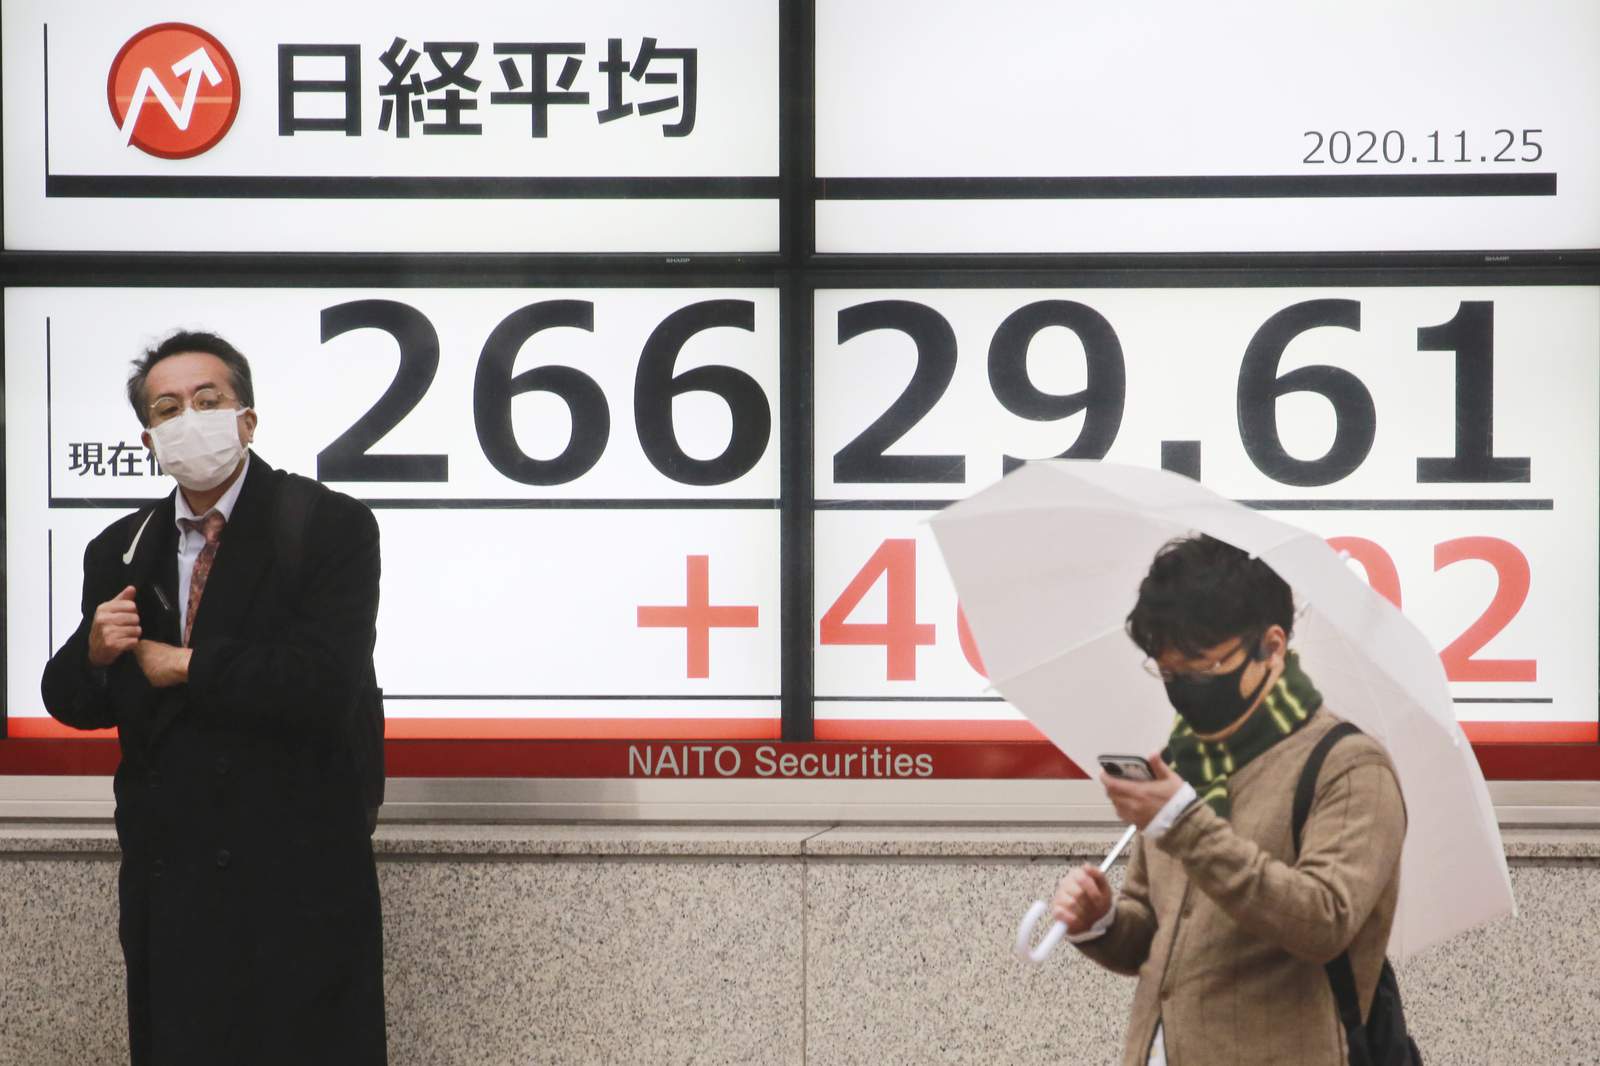 Asian shares rise after Dow crests 30,000 on vaccine hopes